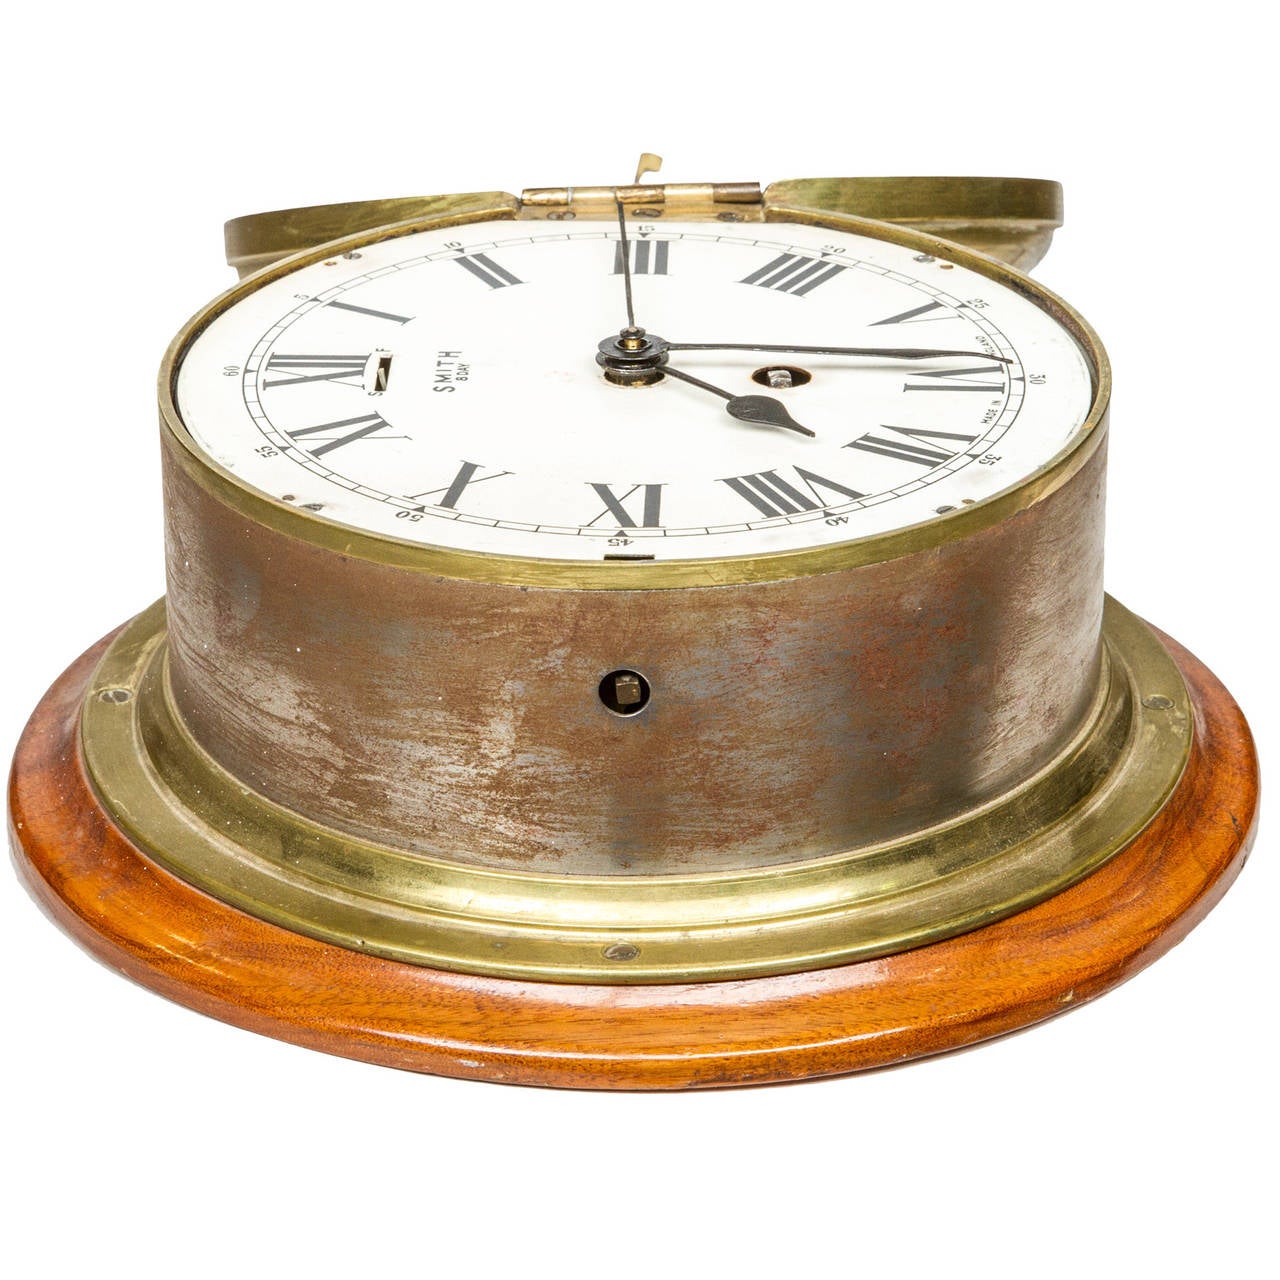 The clock is housed in a heavy brass and steel case. The case is attached to a finished mahogany platform. The white enamel clock face has roman numerals with the minutes in denominations of five. The clock was made in England and is in good working